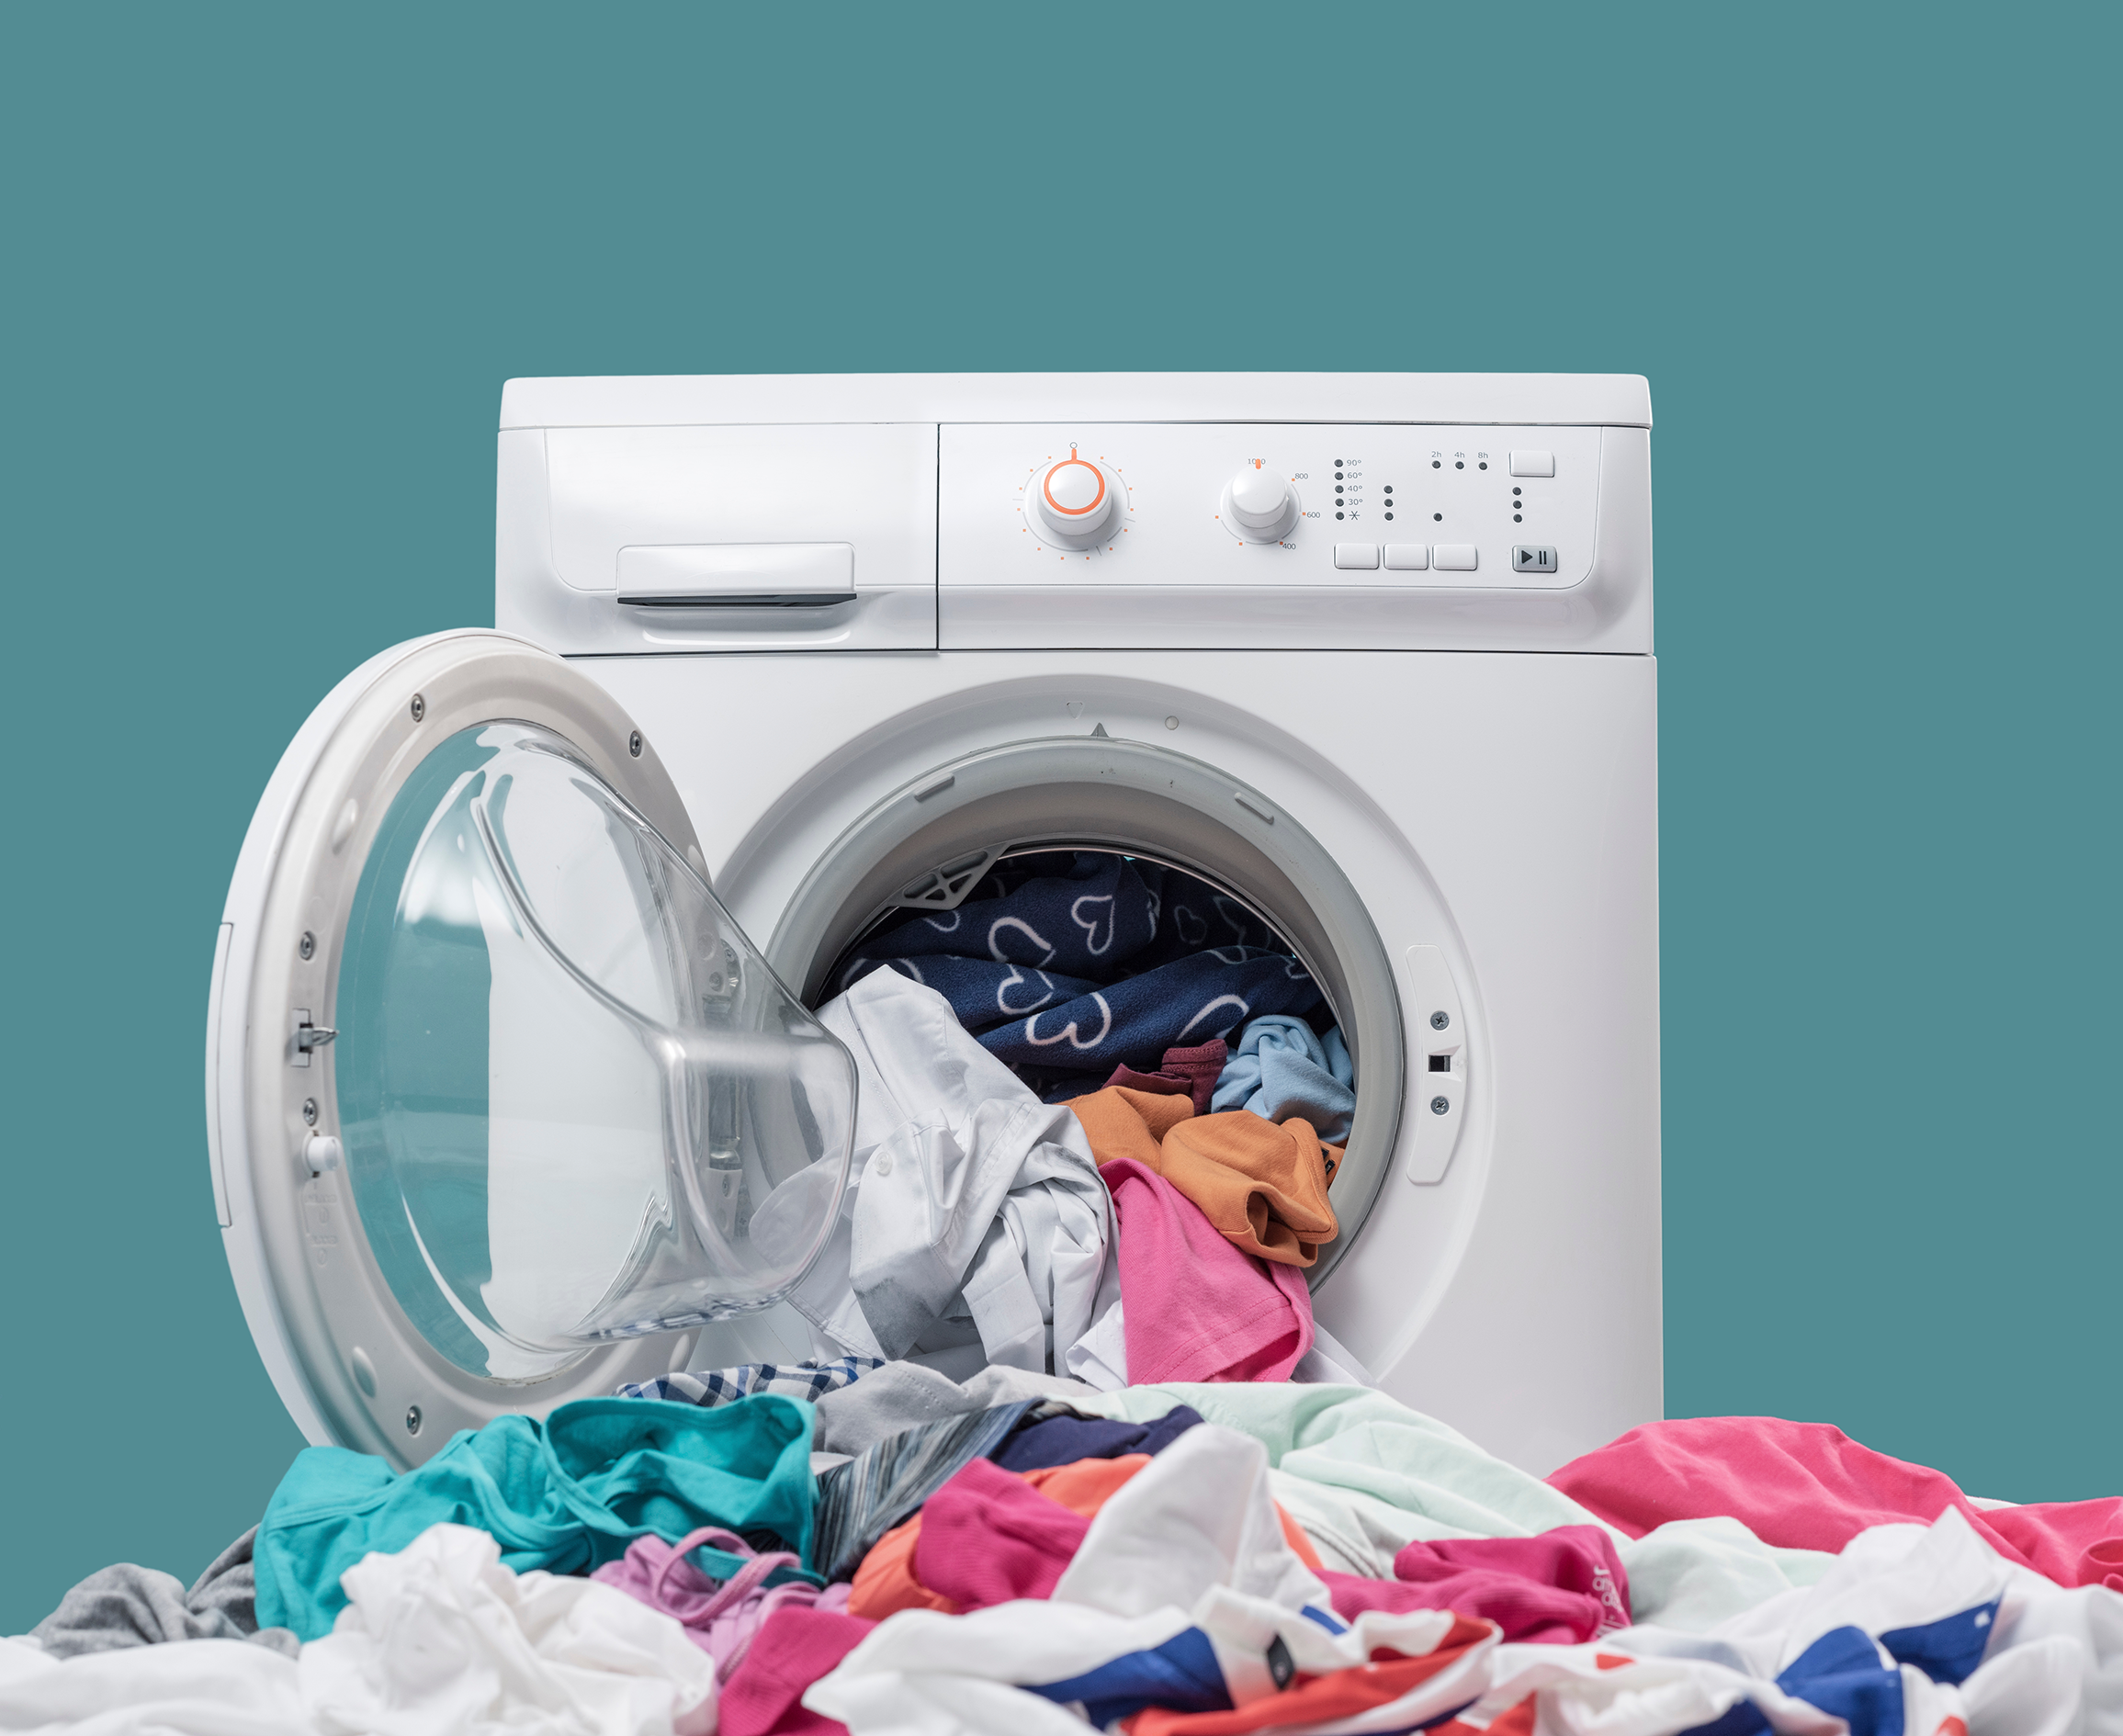 Using the right laundry equipment for the job